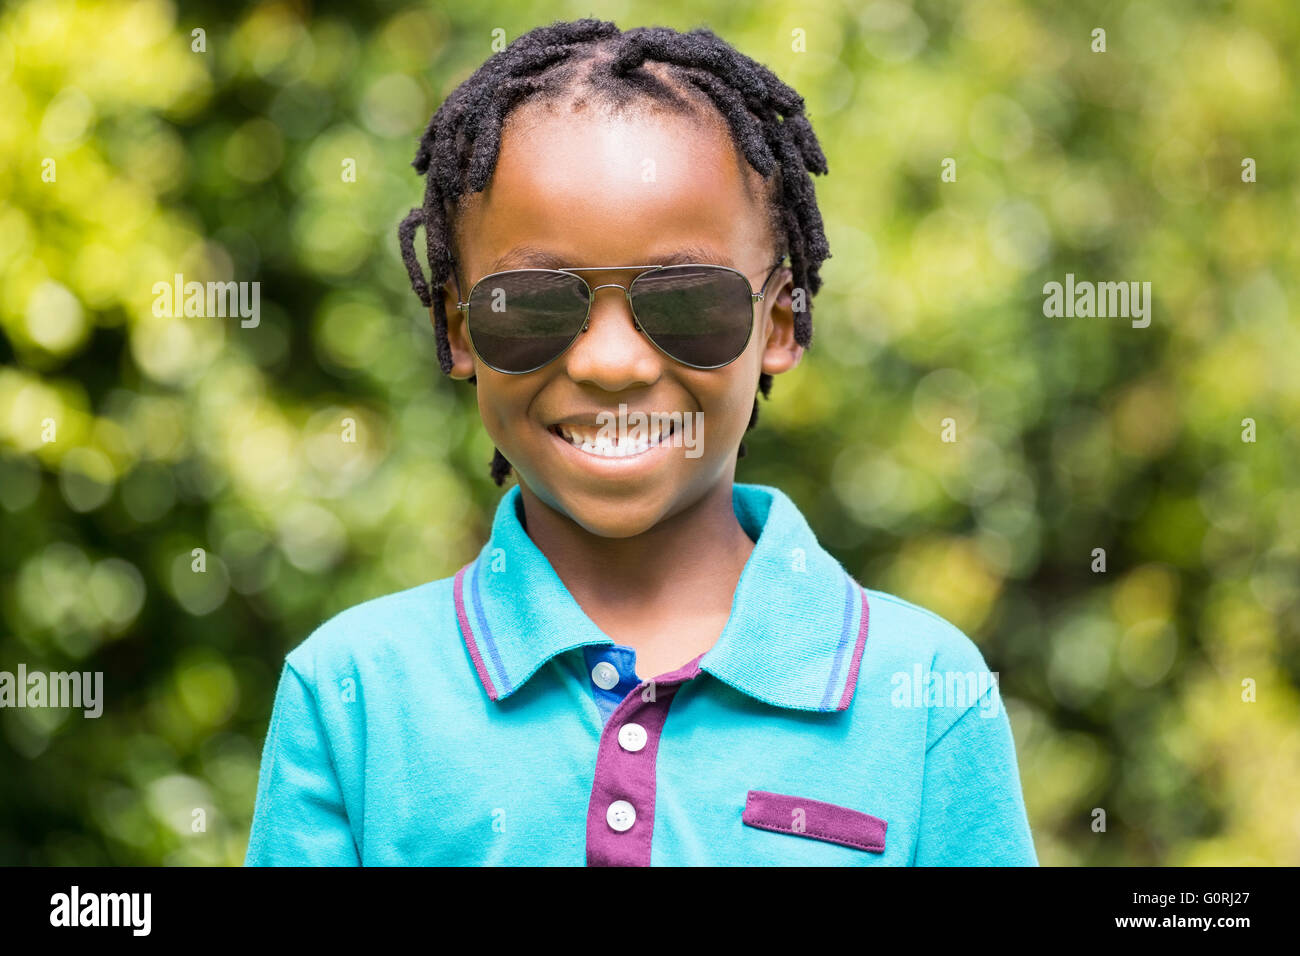 Smiling boy wearing sunglasses Banque D'Images